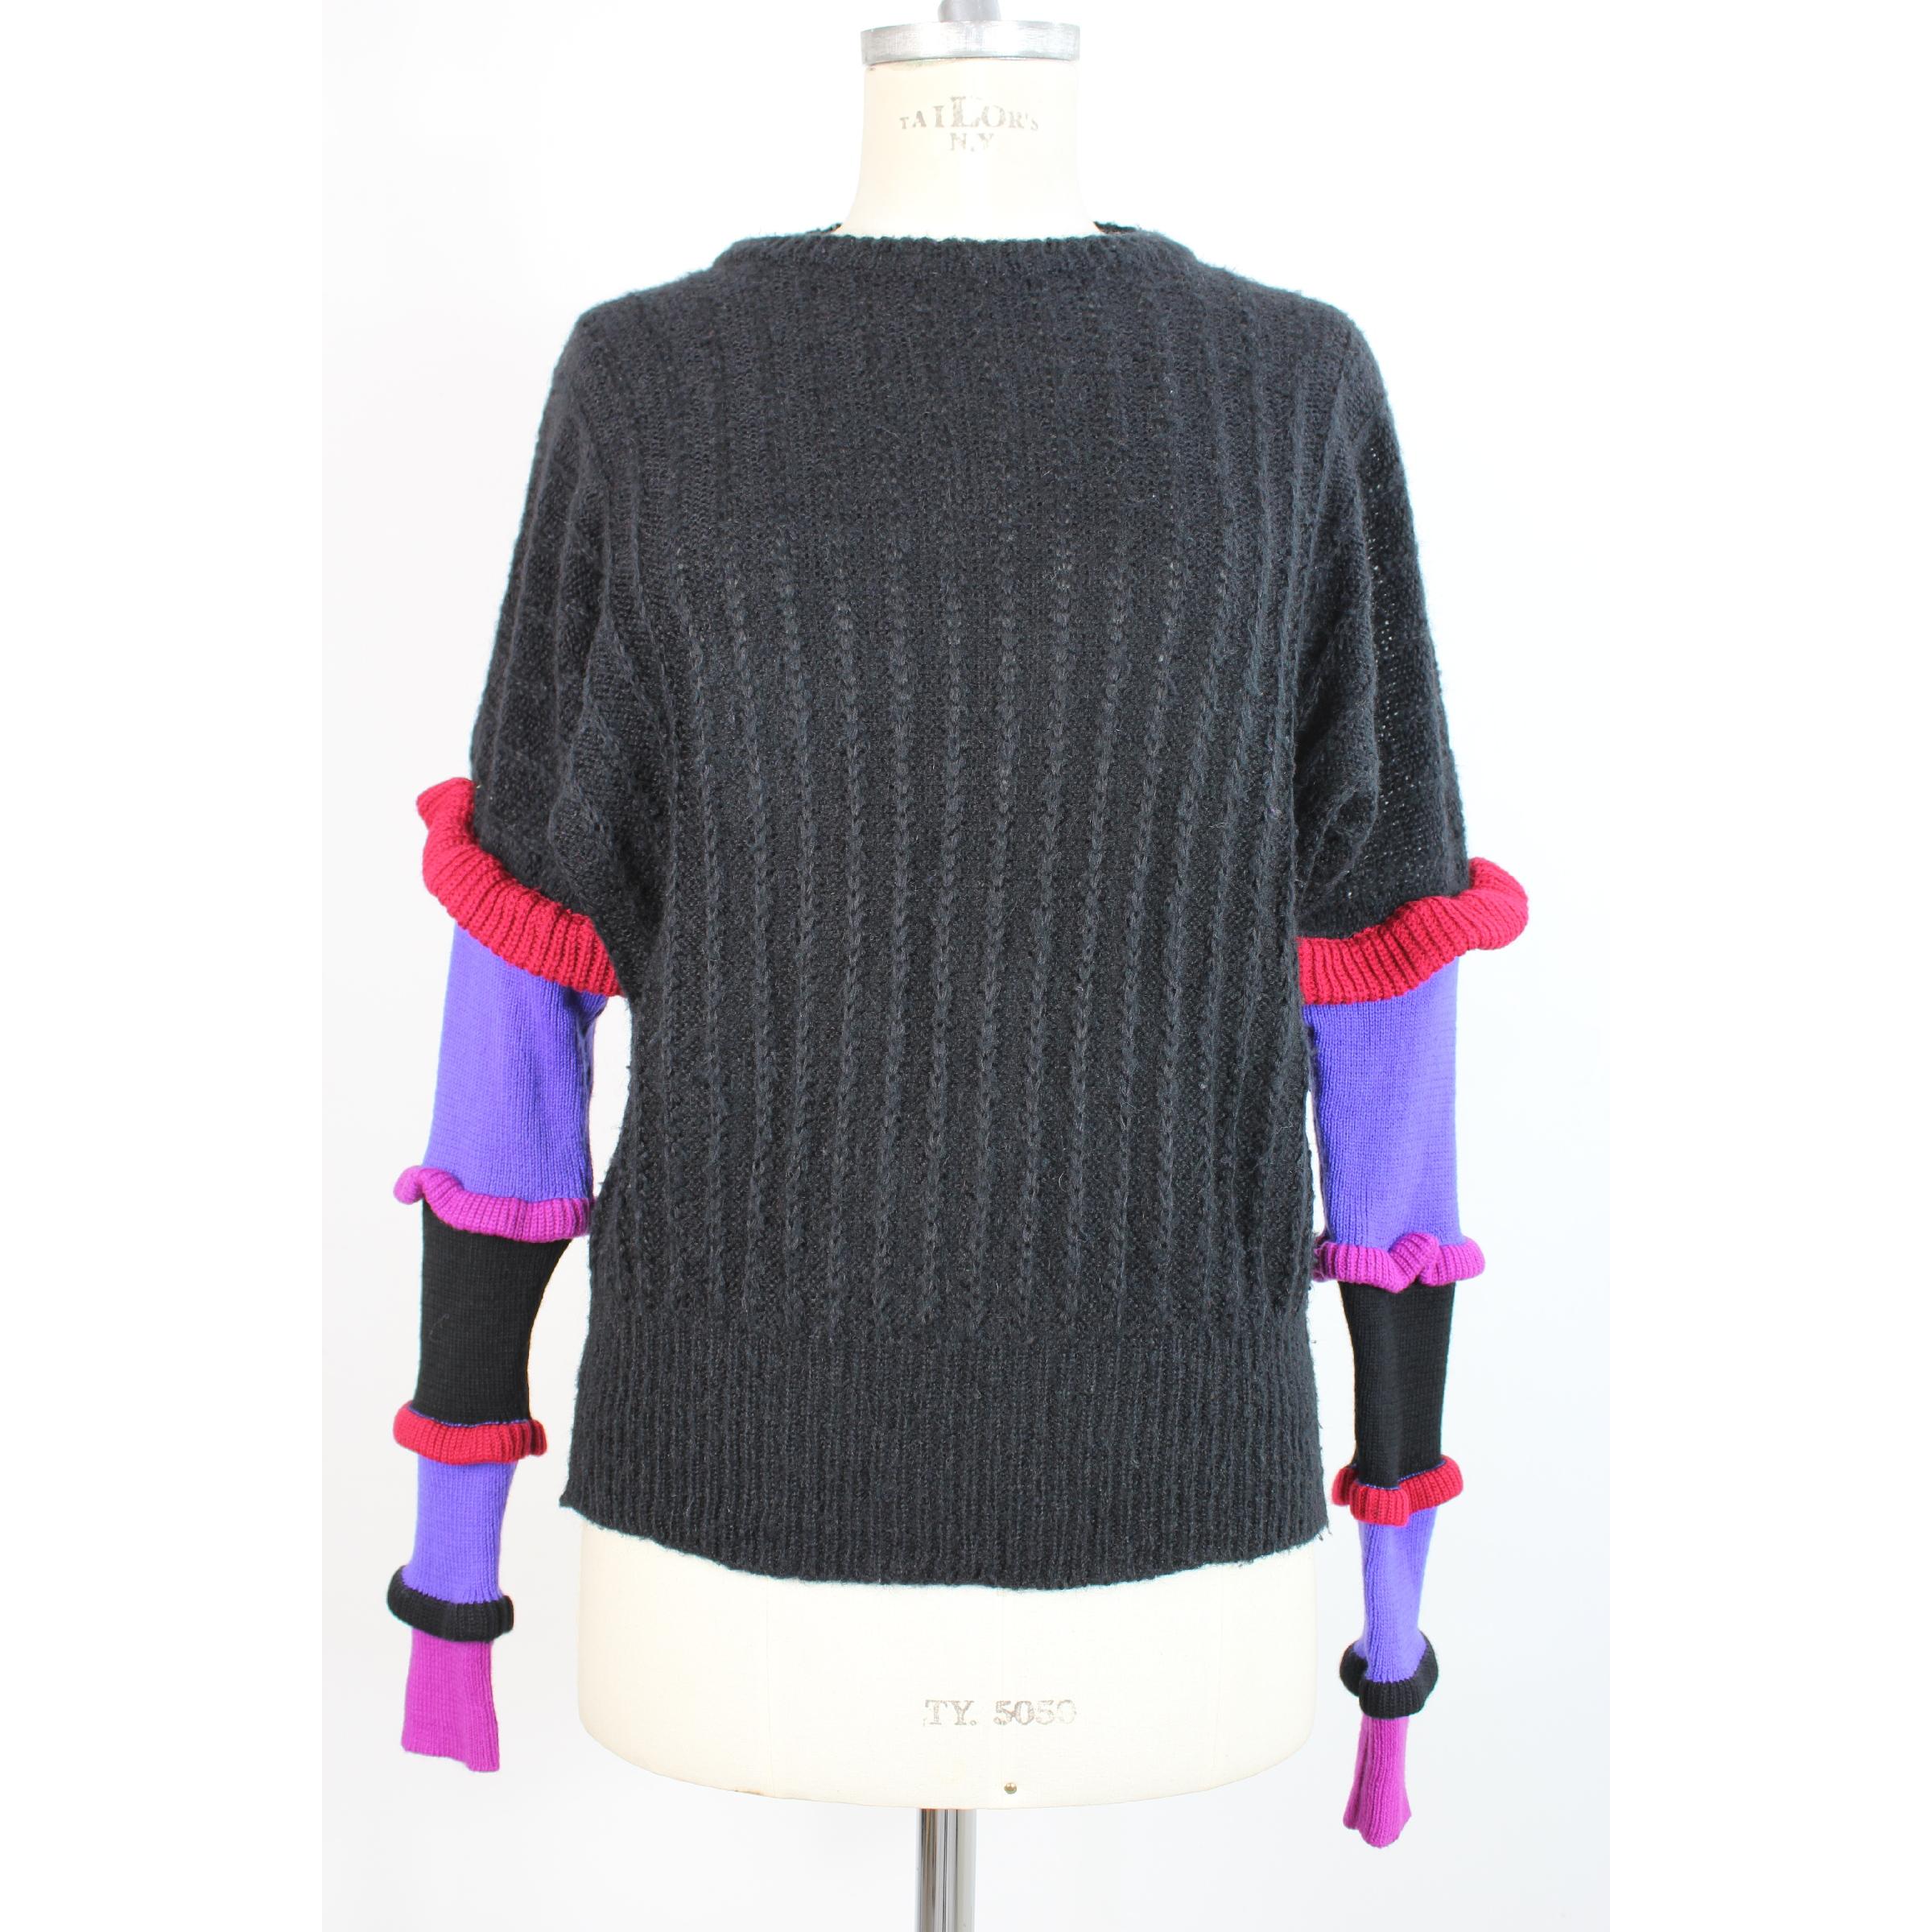 Vintage Roccobarocco women's sweater, black with colored sleeves, 35% wool 30% mohair 20% acrylic 15% poilamide. 1980s. Made in Italy. Good vintage conditions, previously owned and gently worn, with little signs of use. May show slight pilling,